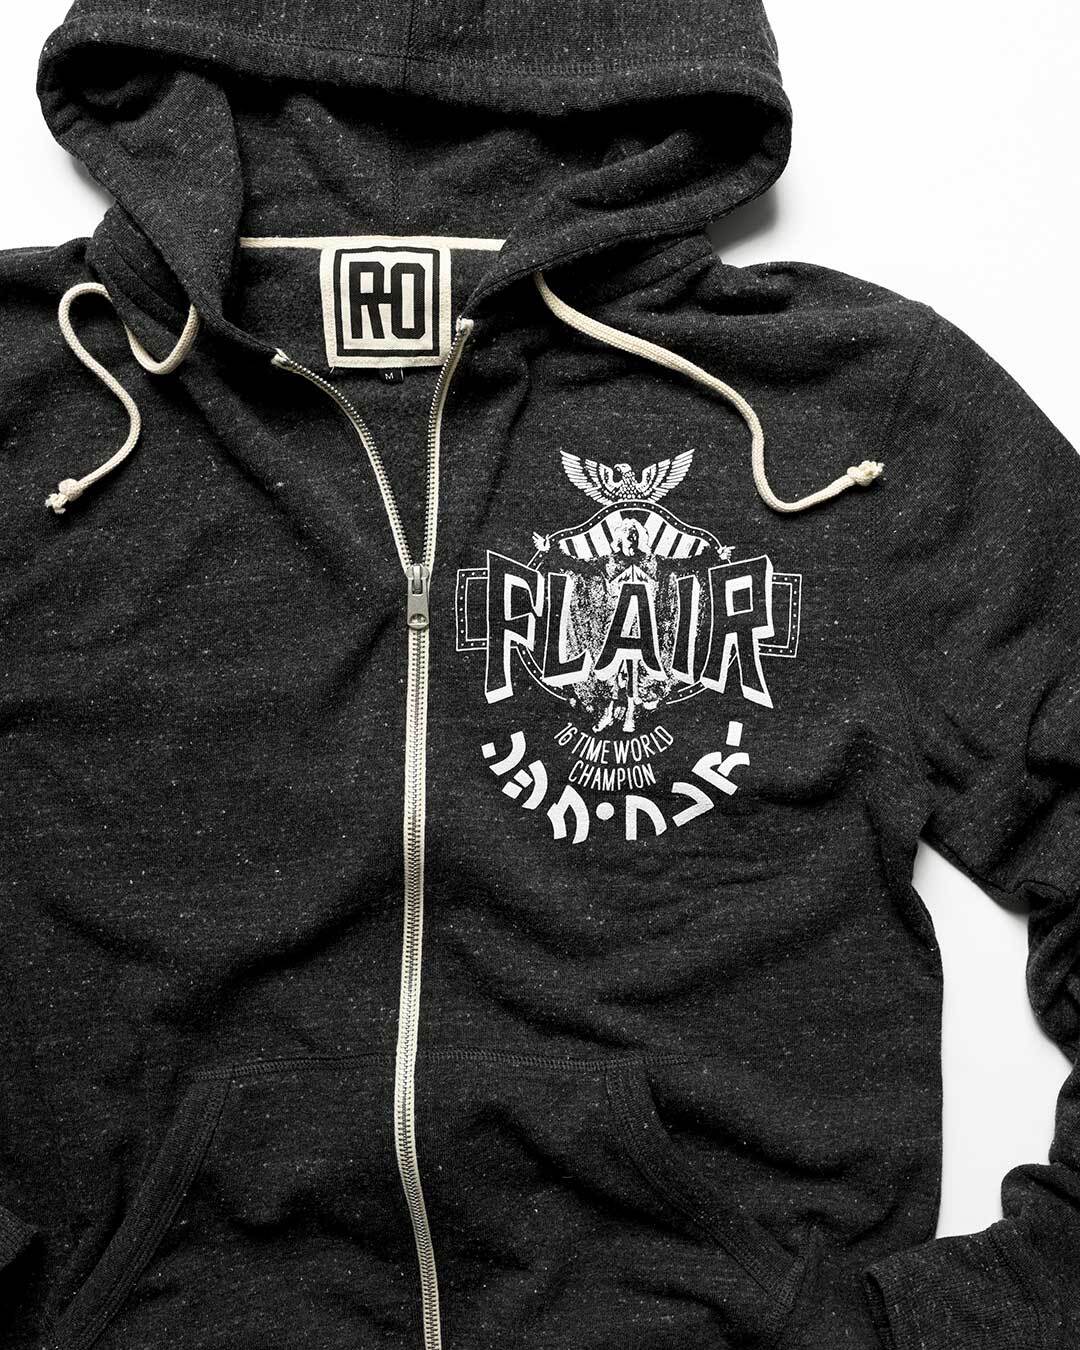 Ric Flair Japan Gym Black FZ Hoody - Roots of Fight